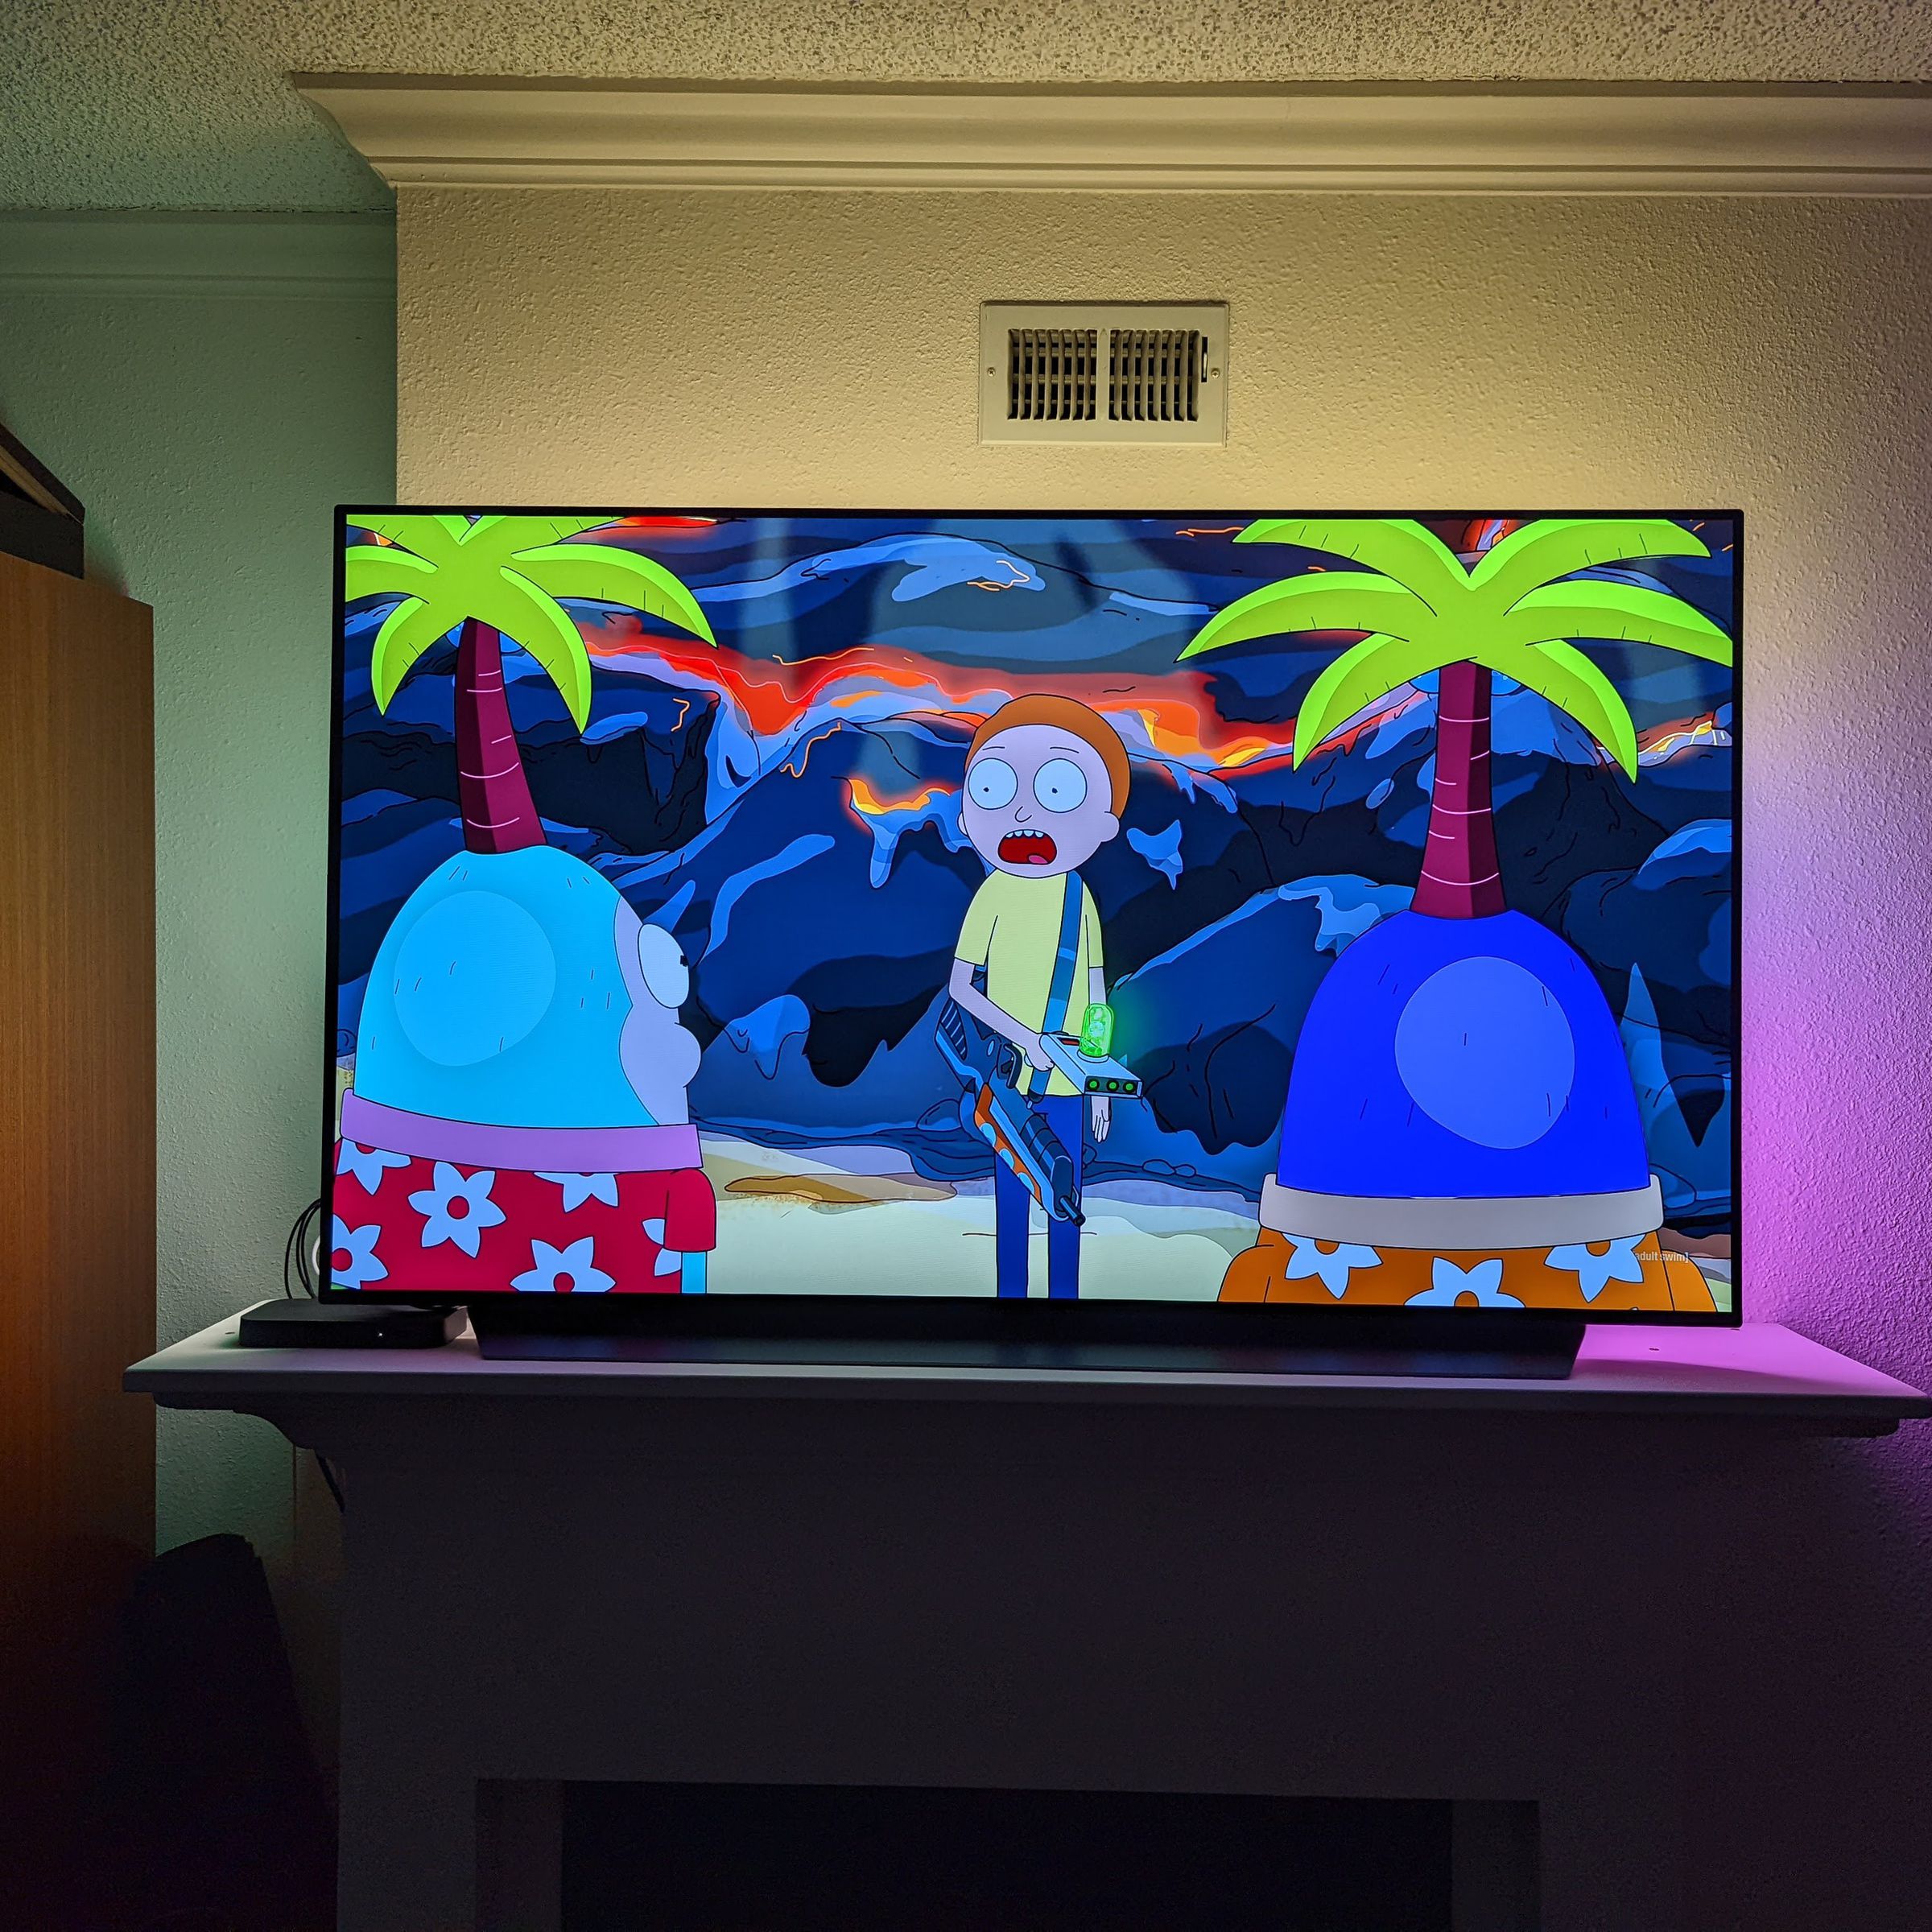 The Hue sync box and gradient lightstrip combo can produce vibrant colors to match the content on your TV.